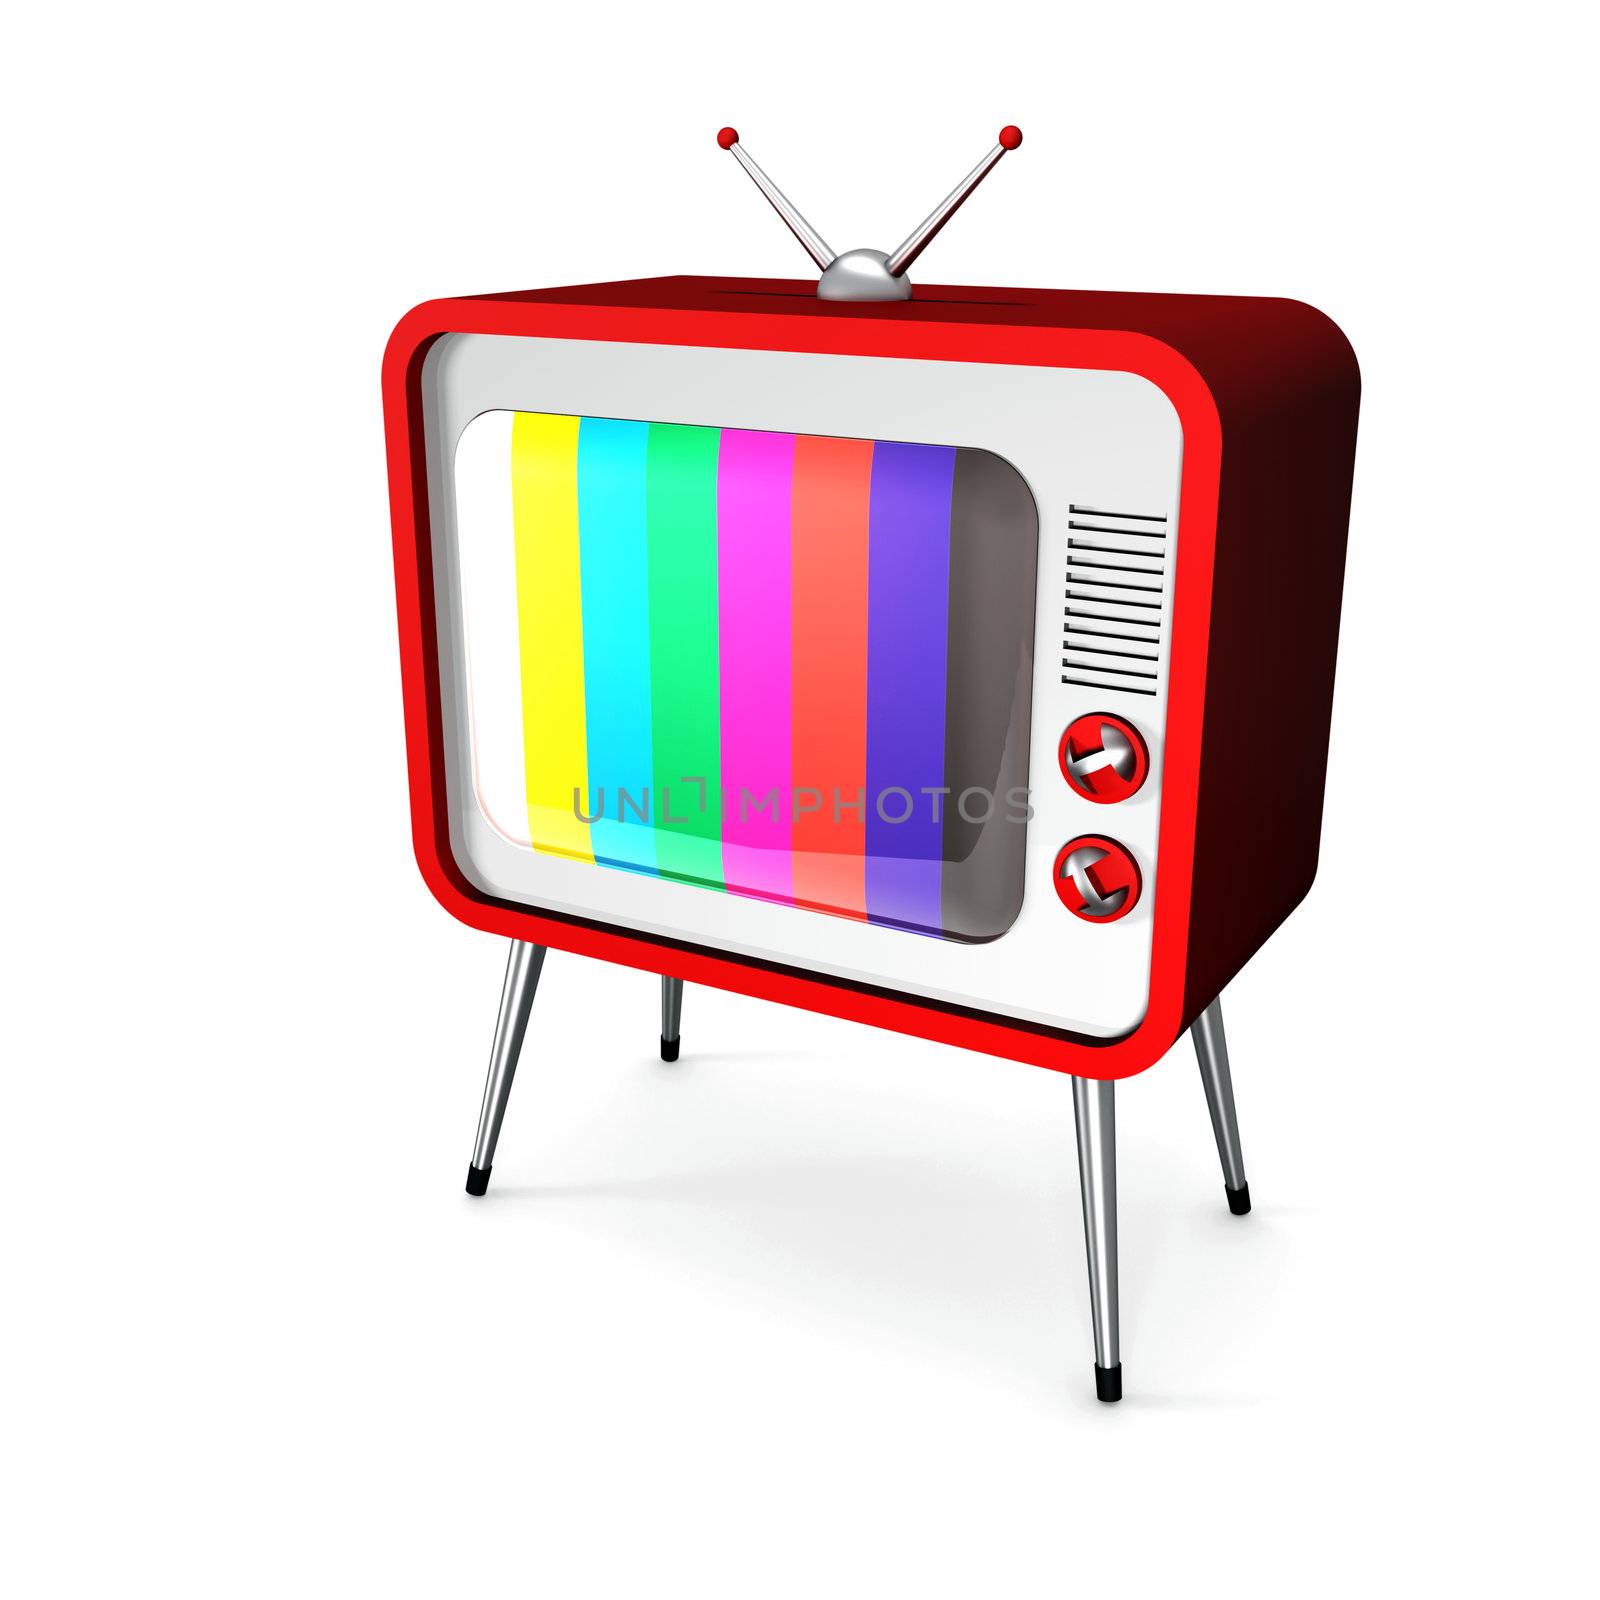 Red TV by magraphics